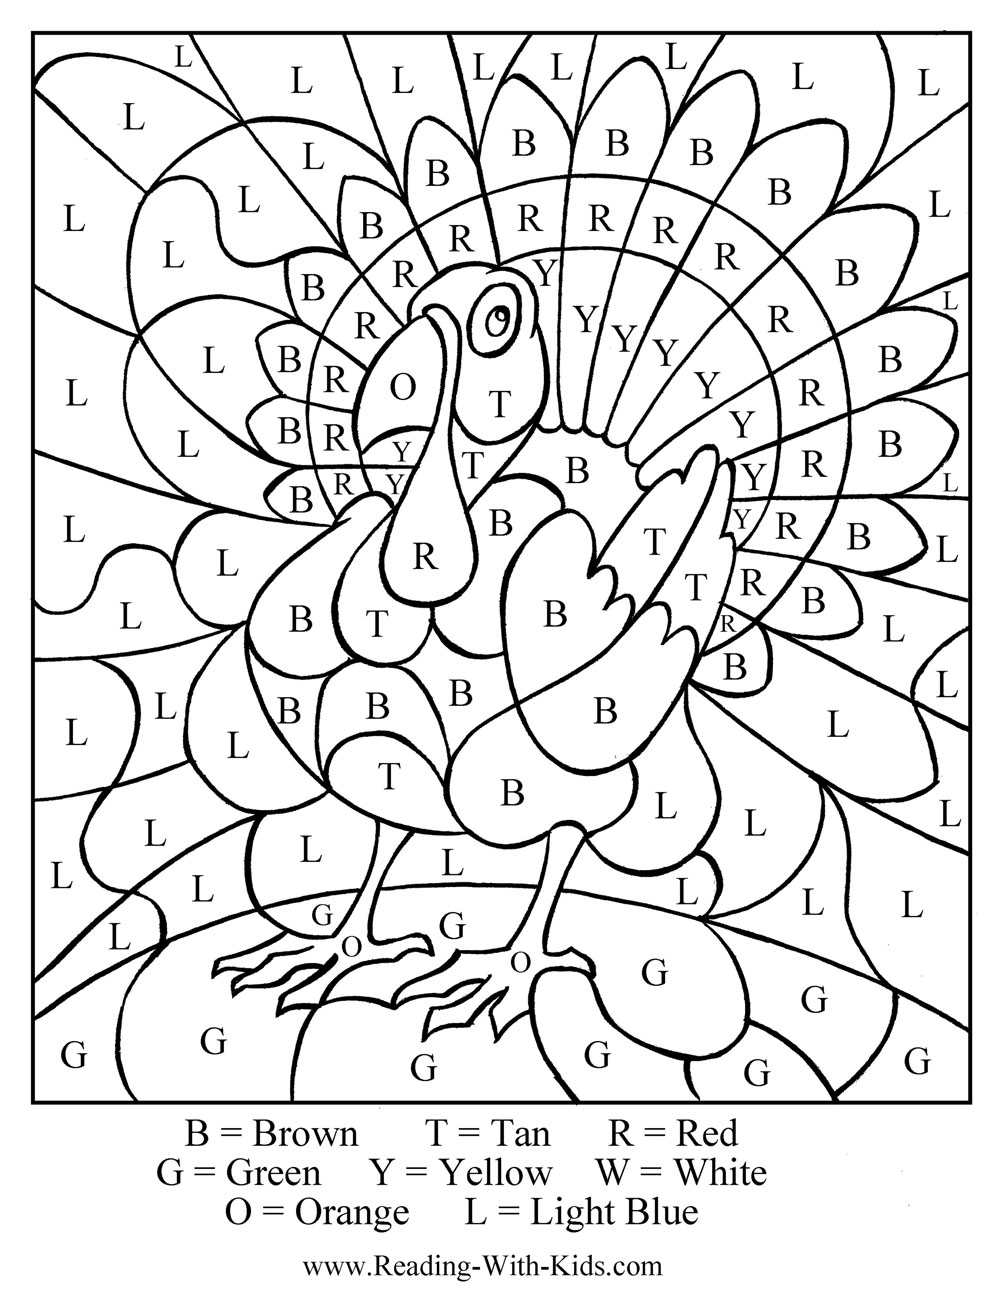 free-thanksgiving-coloring-pages-games-printables-thankgiving-between-the-kids